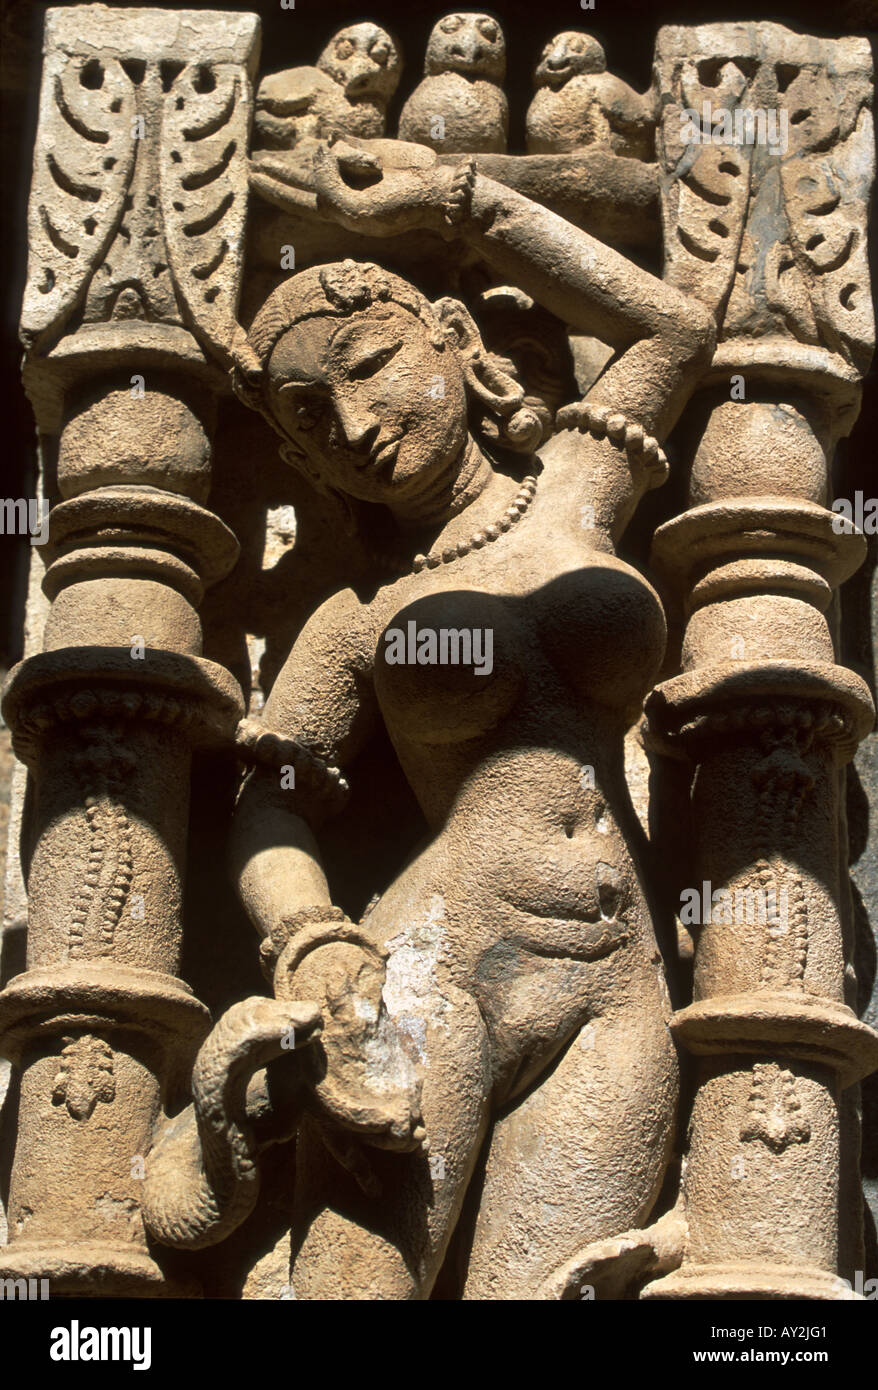 Carved stone female figure, Patan step well called the Rani ki vav, Gujarat, India. Built about 1050 A.D. Stock Photo